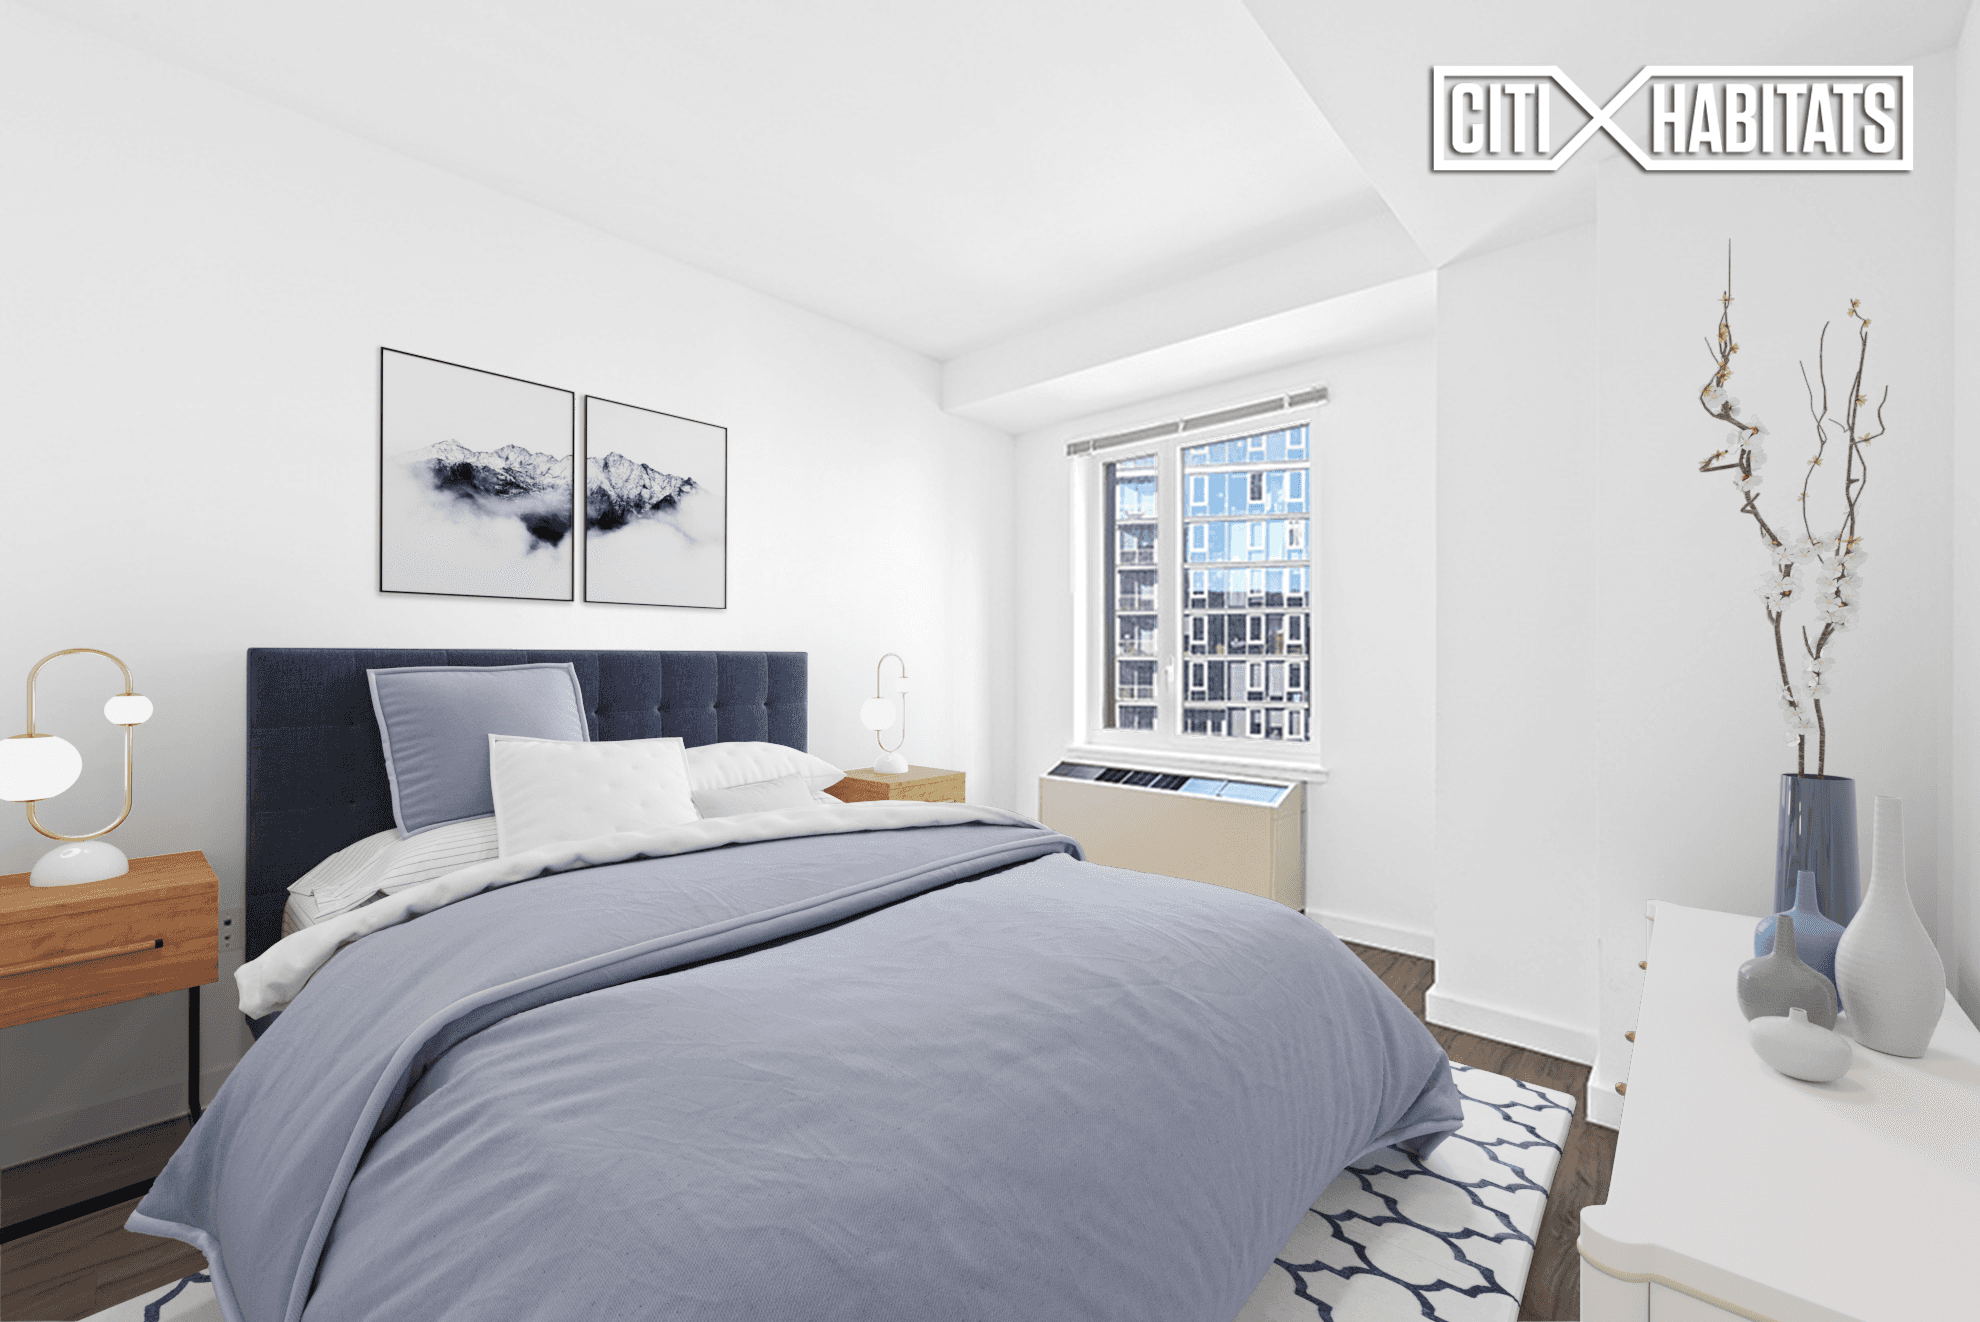 Welcome to 7 Dekalb Avenue in Downtown Brooklyn a luxury 1 bedroom home conveniently located next to City Point and DeKalb Market.